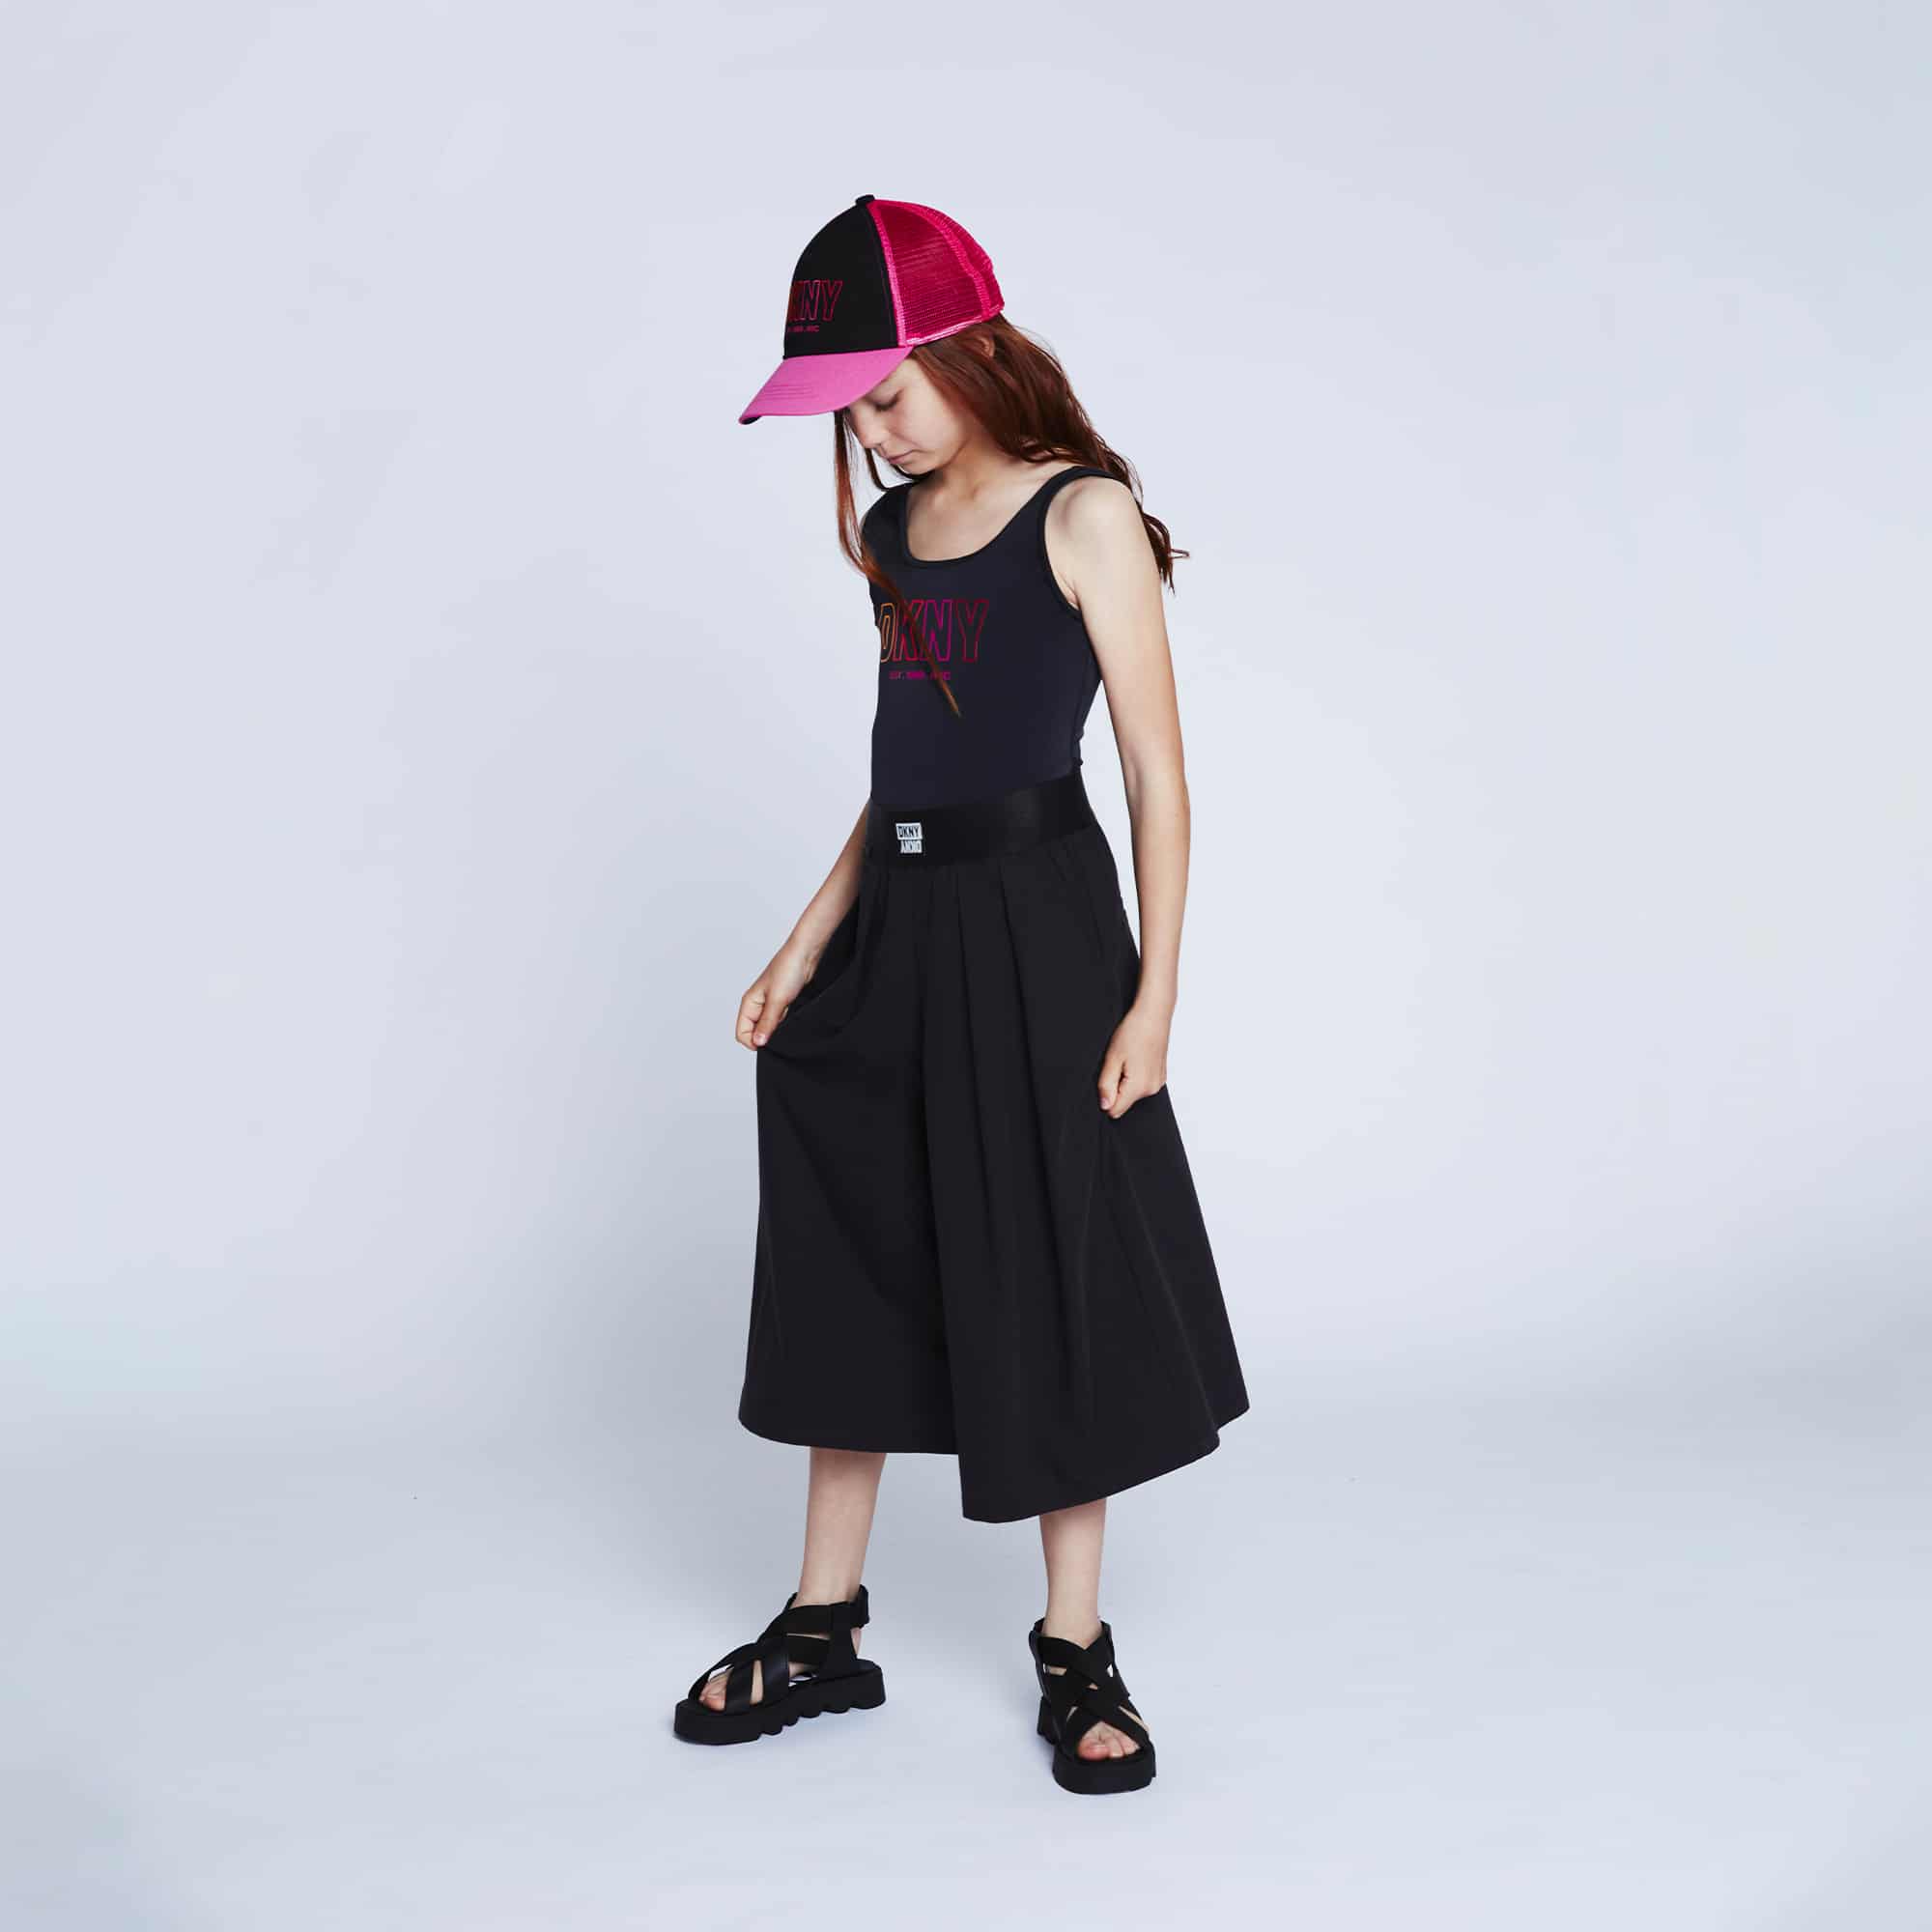 DKNY girls model in black outfit and baseball cap